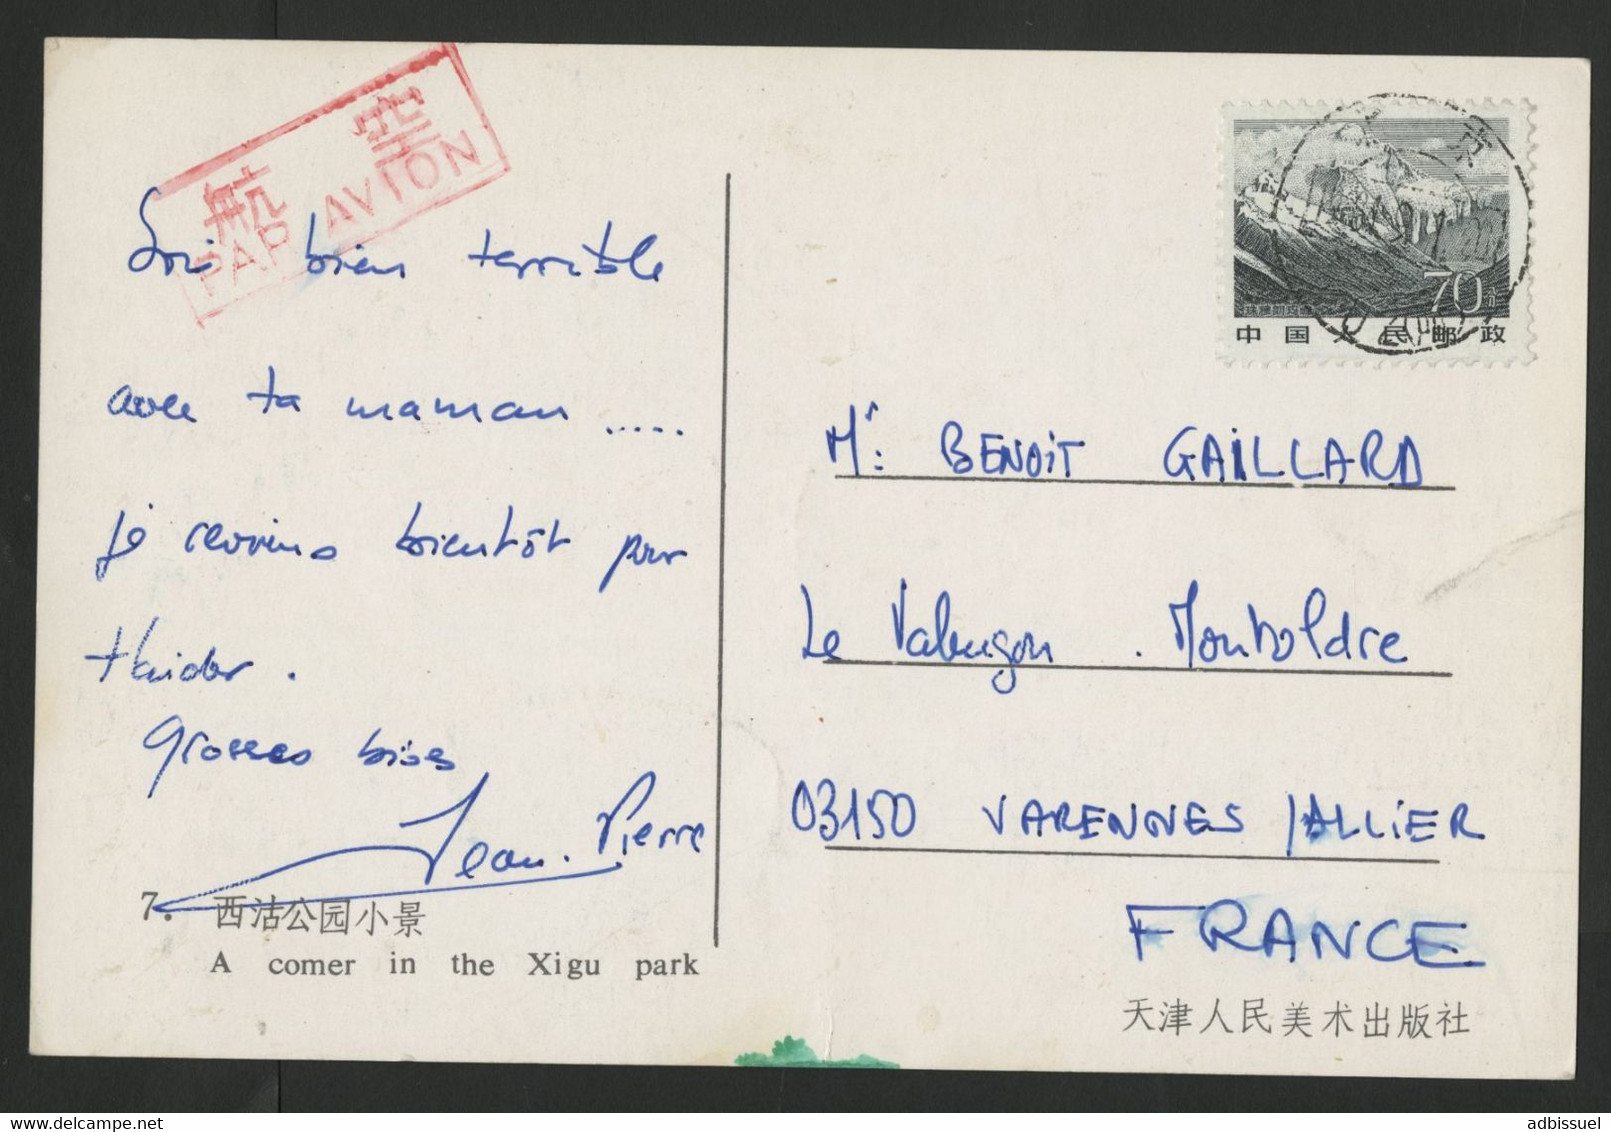 CHINA N° 2588 Zhumulangma / Everest On A Postcard By Airmail To France. - Covers & Documents